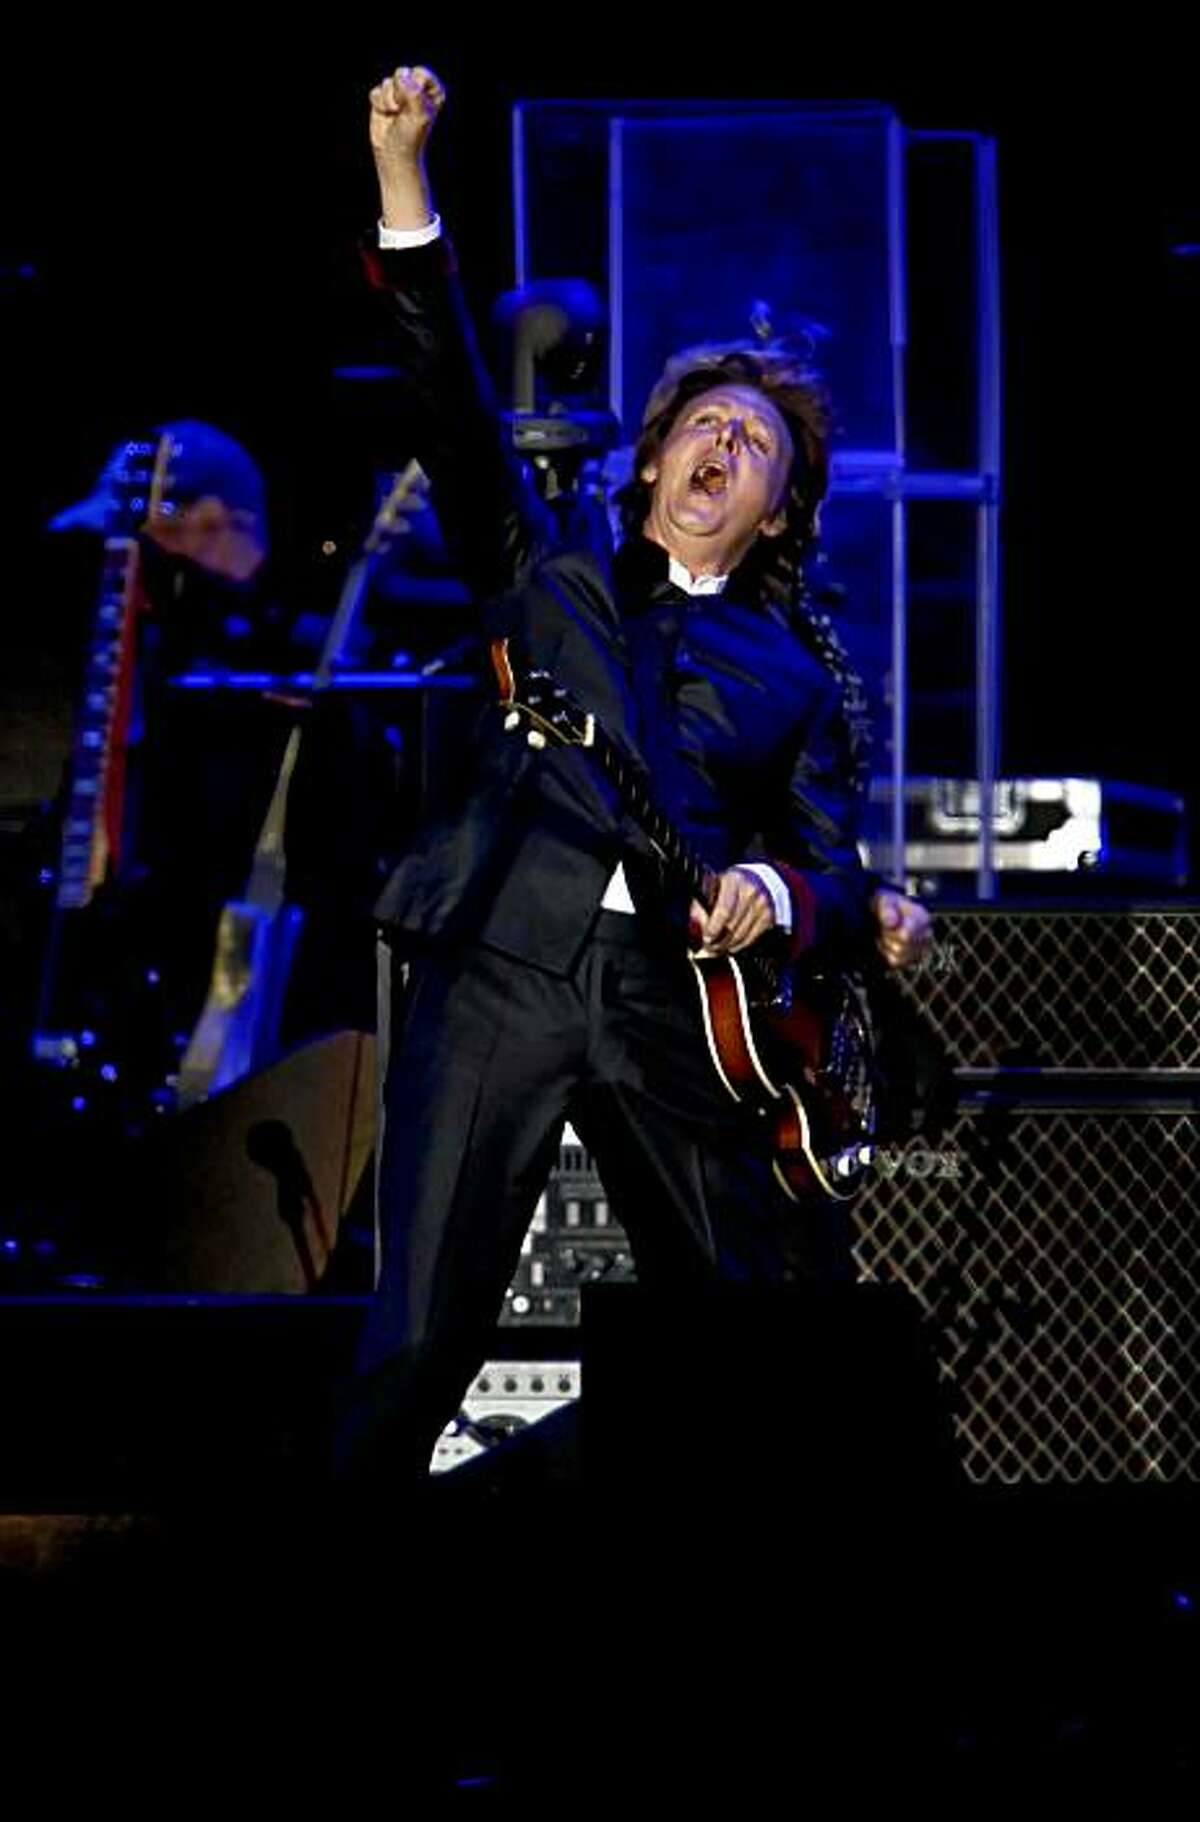 Sir Paul McCartney takes the stage as he plays a sold out show at AT&T Park in San Francisco, Ca. on Saturday July 10, 2010.